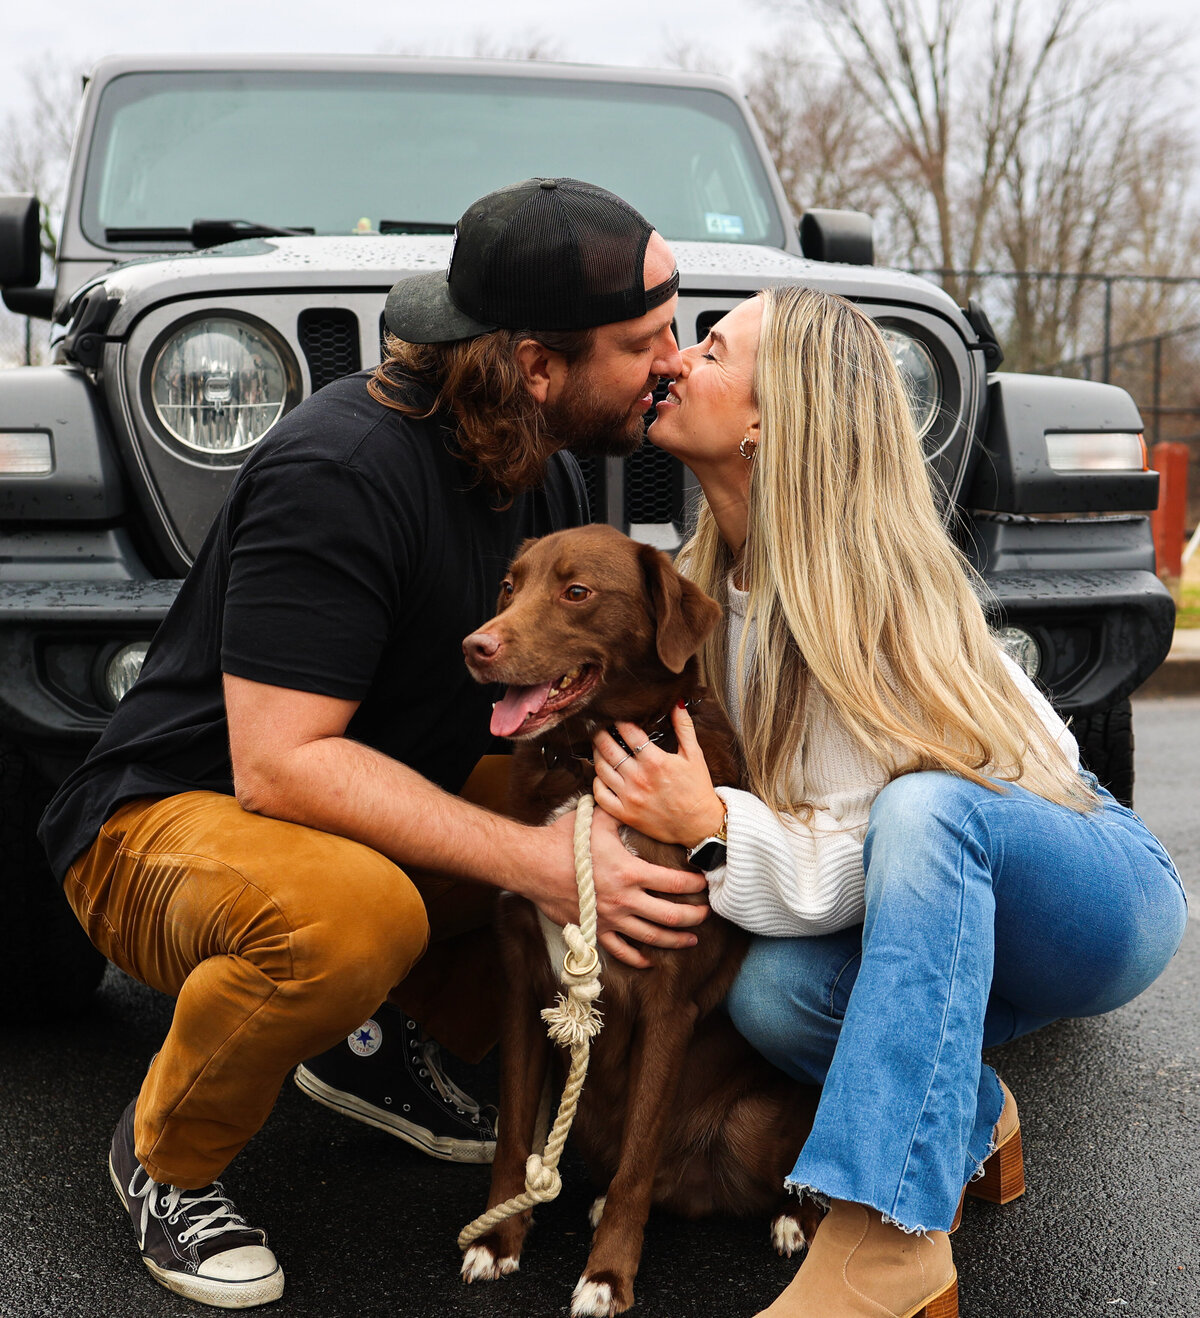 man wearing hat backwards and woman wearing jeans kissing with brown dog between them